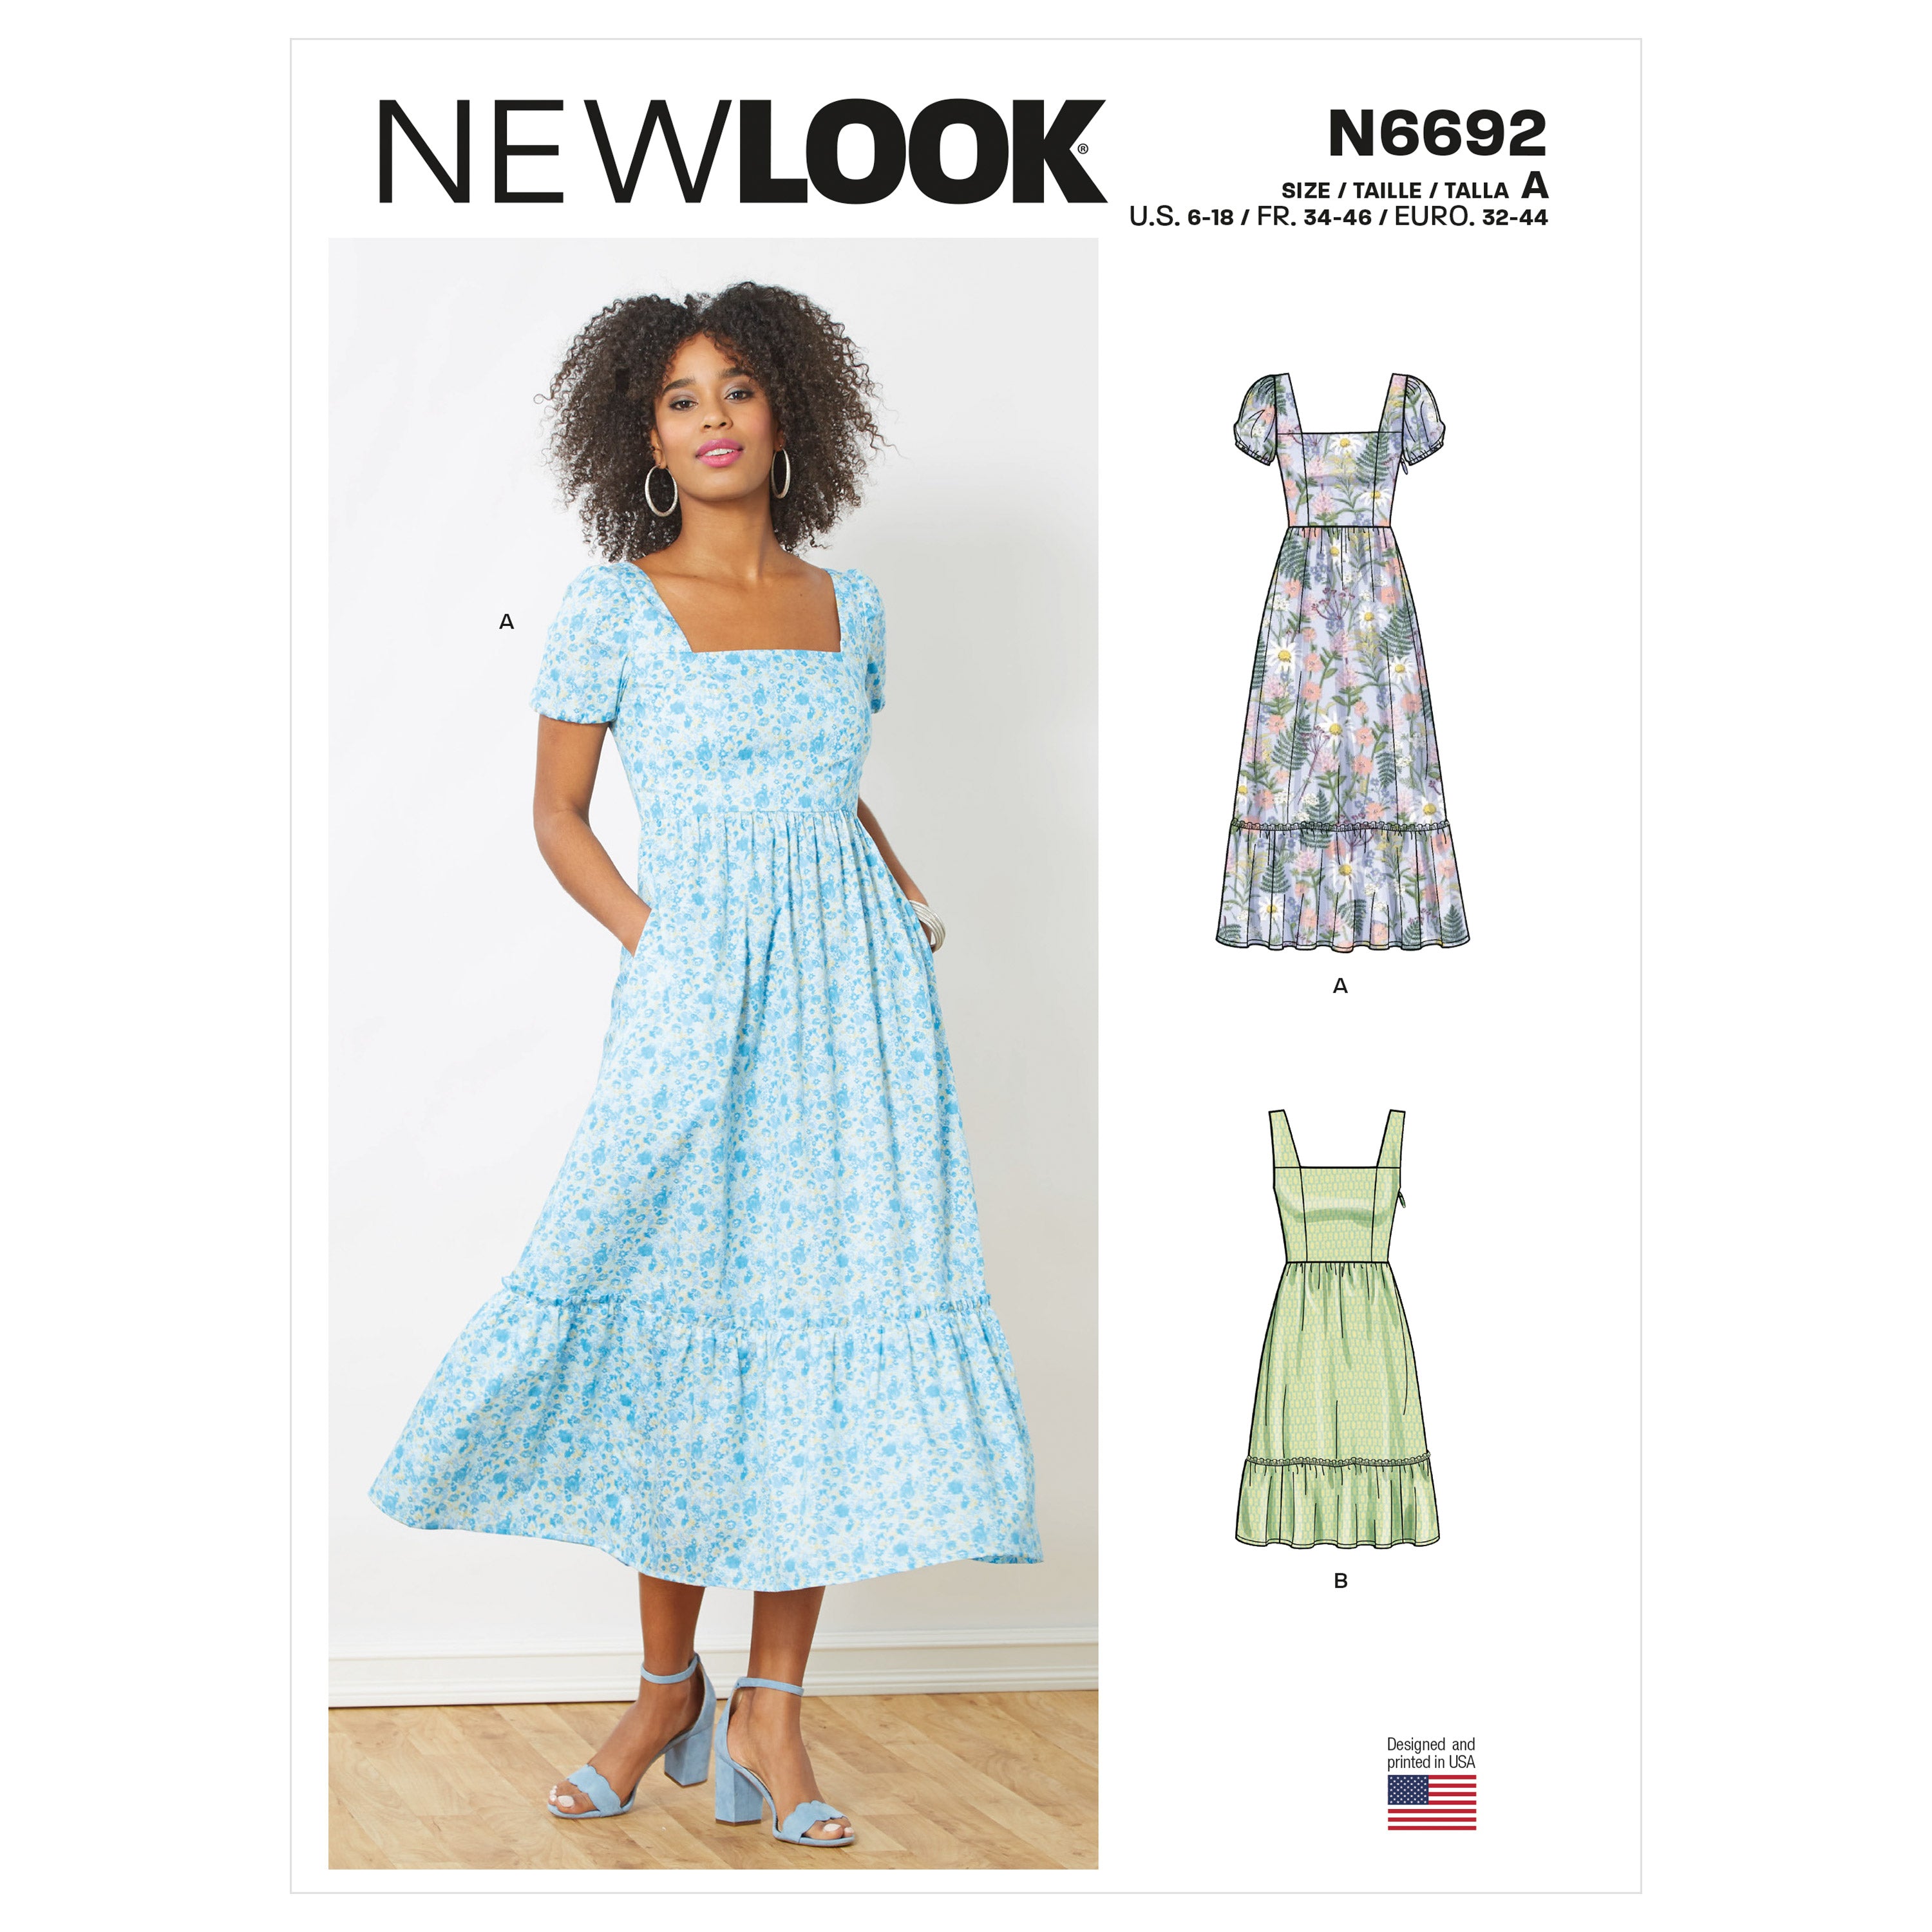 New Look Sewing Pattern 6299 N6299 Misses' Dress with Neckline & Sleev –  You've Got Me In Stitches